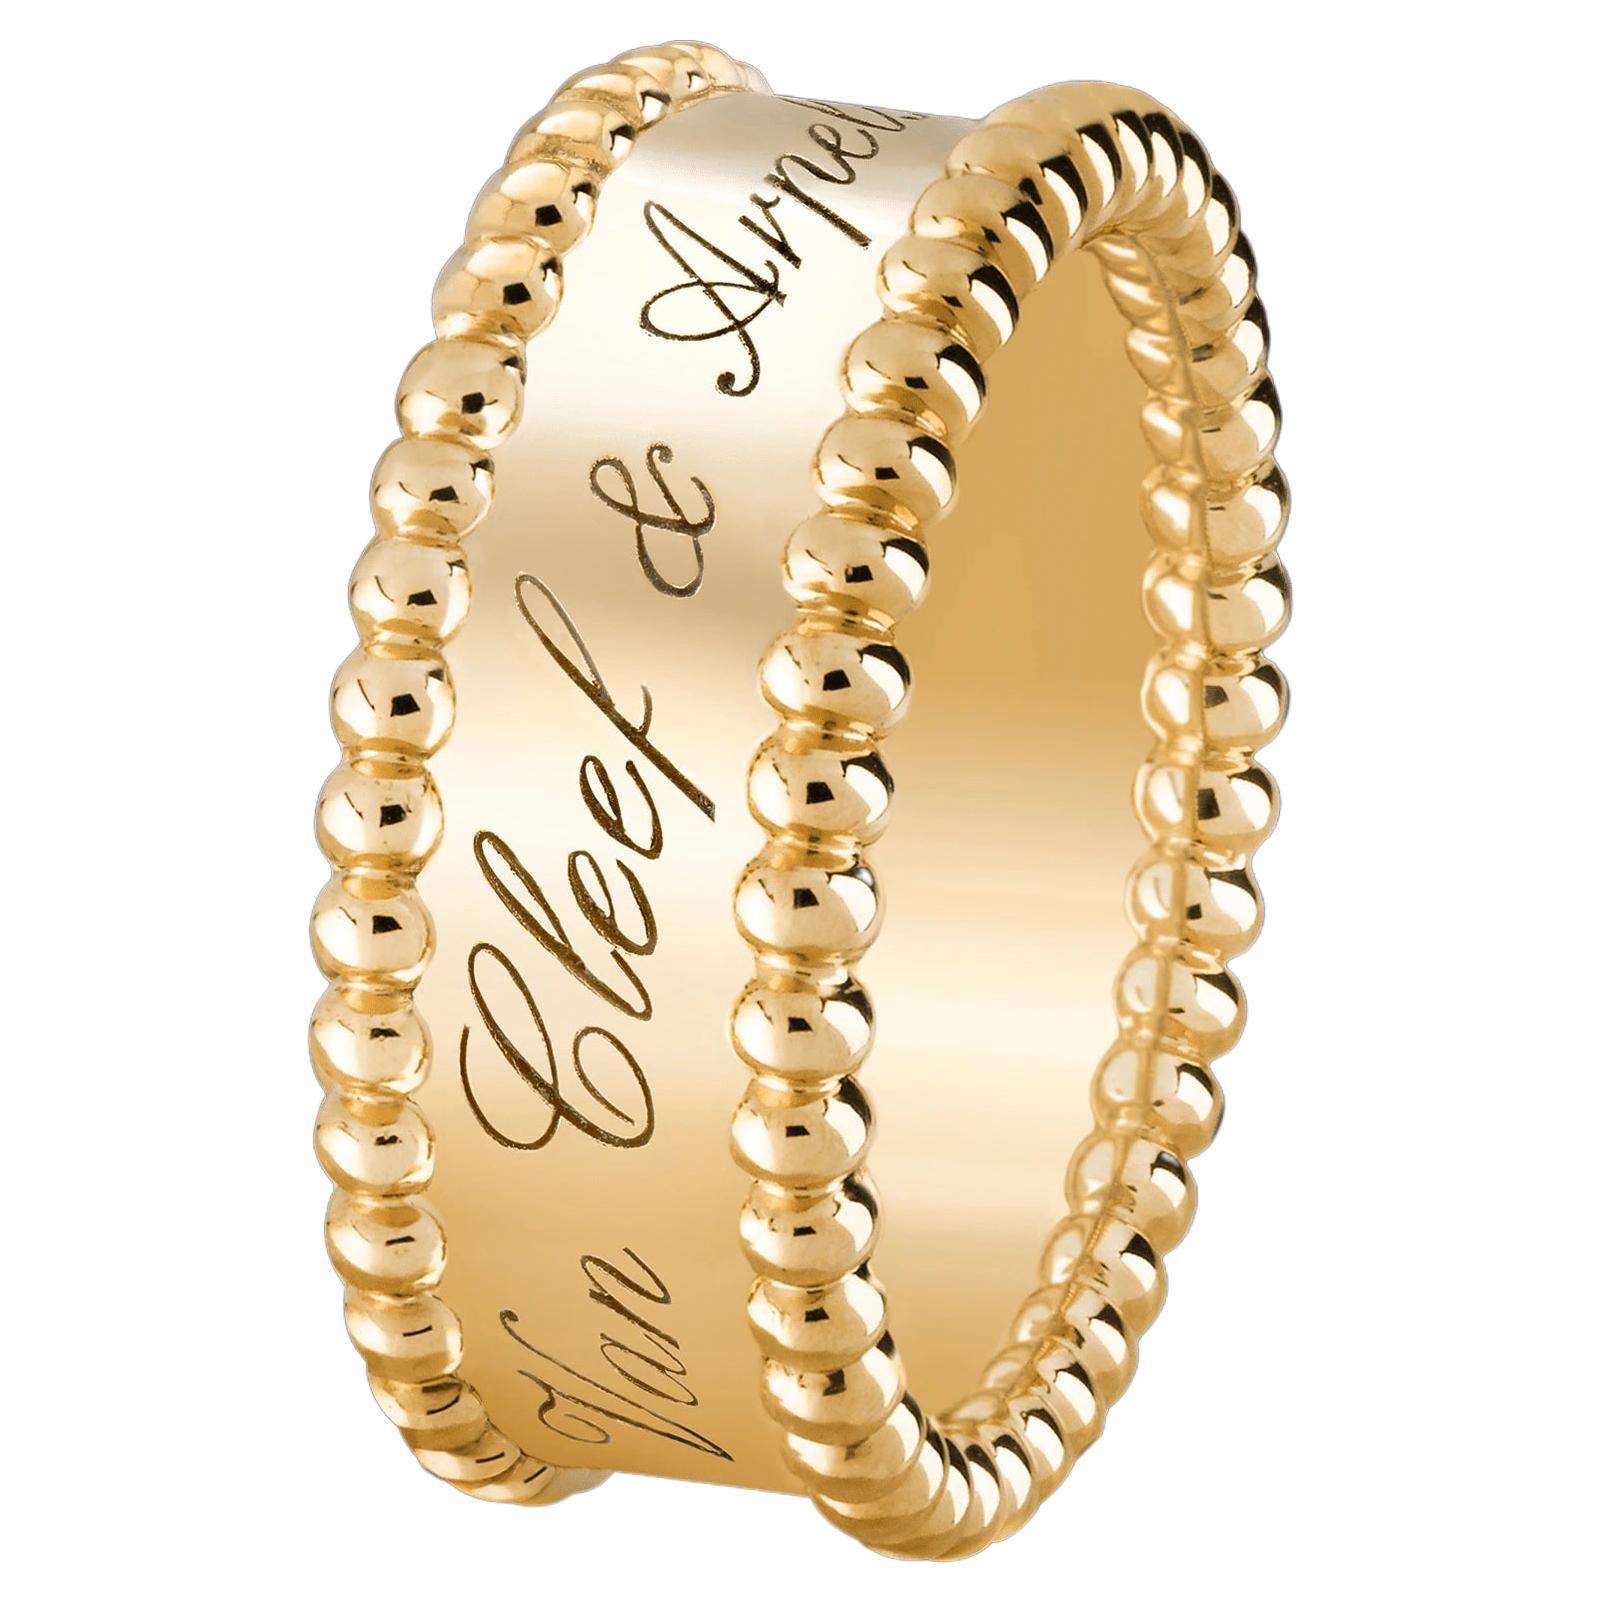 Van Cleef & Arpels Perlée Signature Statement Ring in 18k yellow gold 